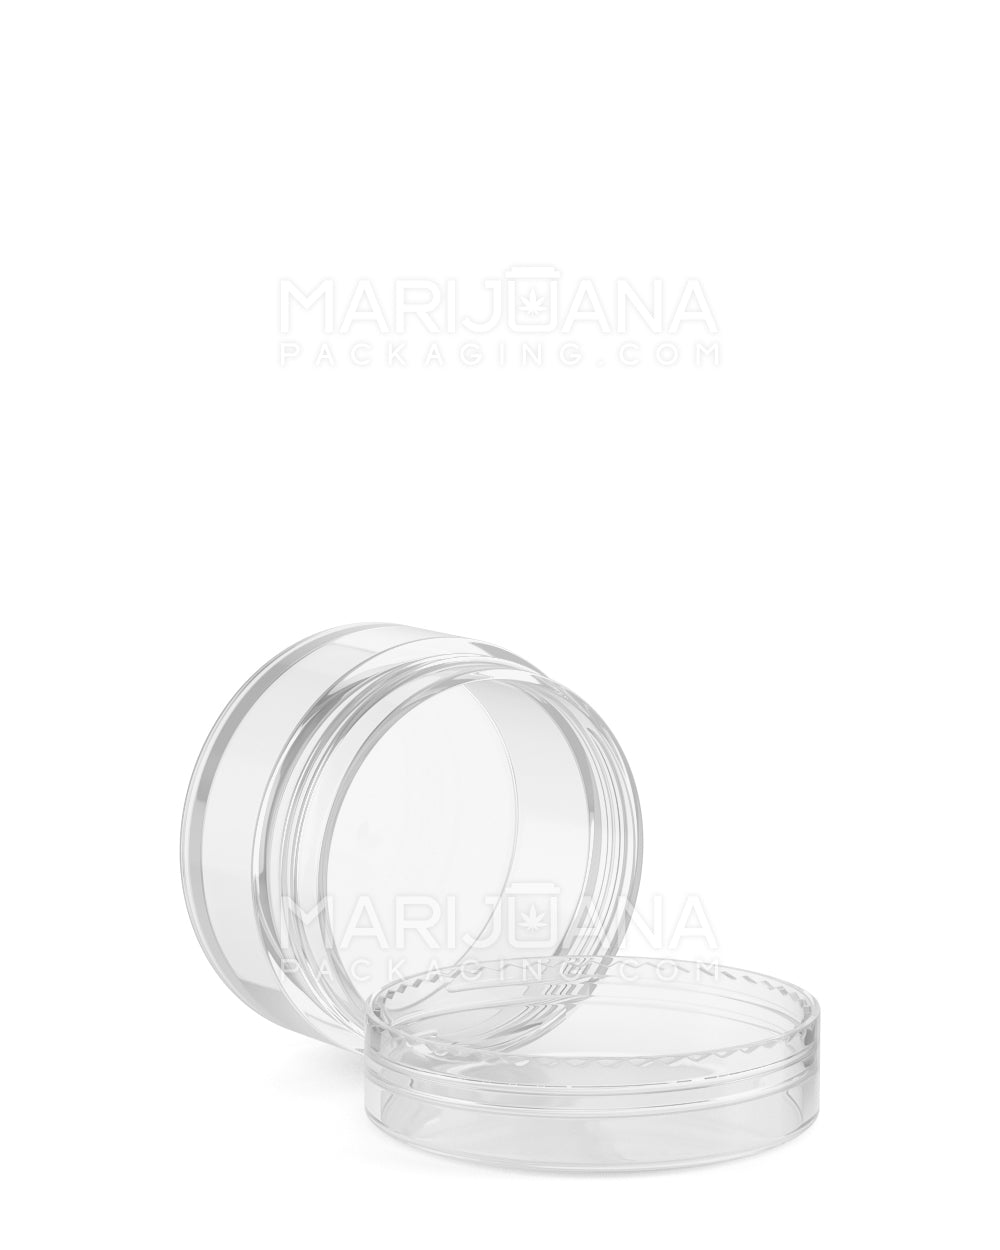 Clear Concentrate Containers w/ Screw Top Cap | 15mL - Plastic - 200 Count - 3